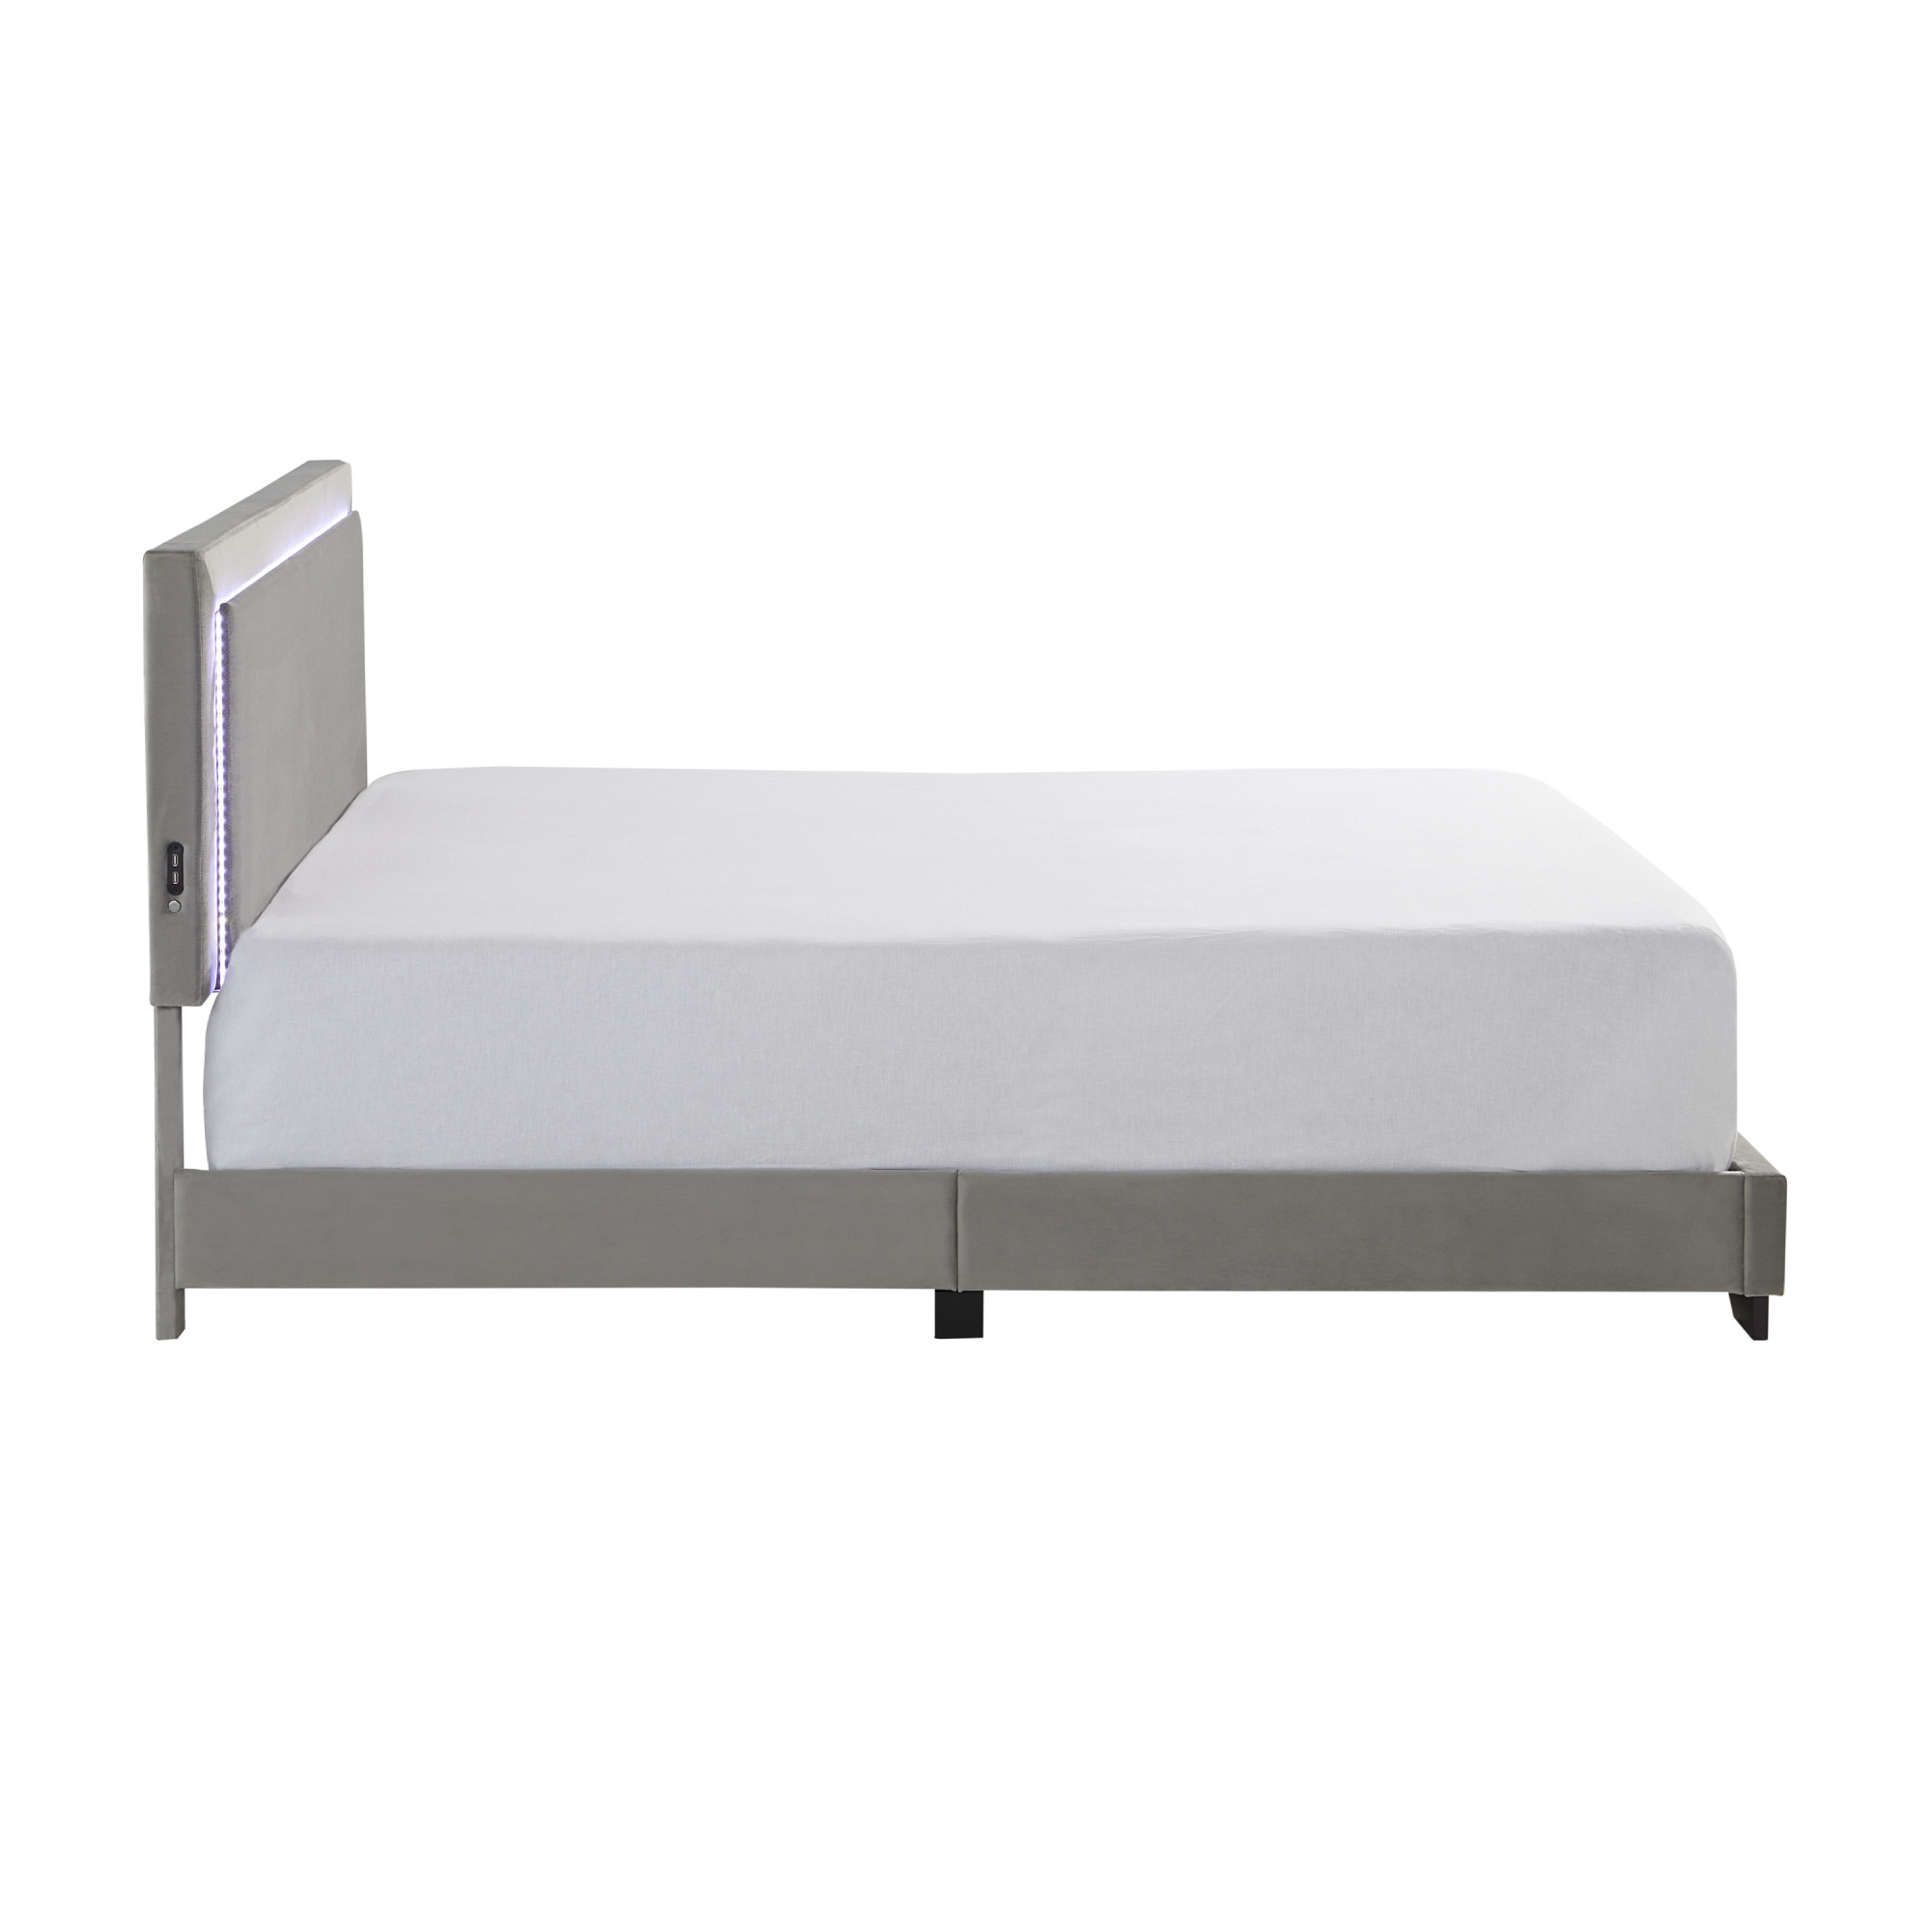 Anchorage Upholstered Queen Bed with LED Lights and USB, Platinum - image 17 of 17